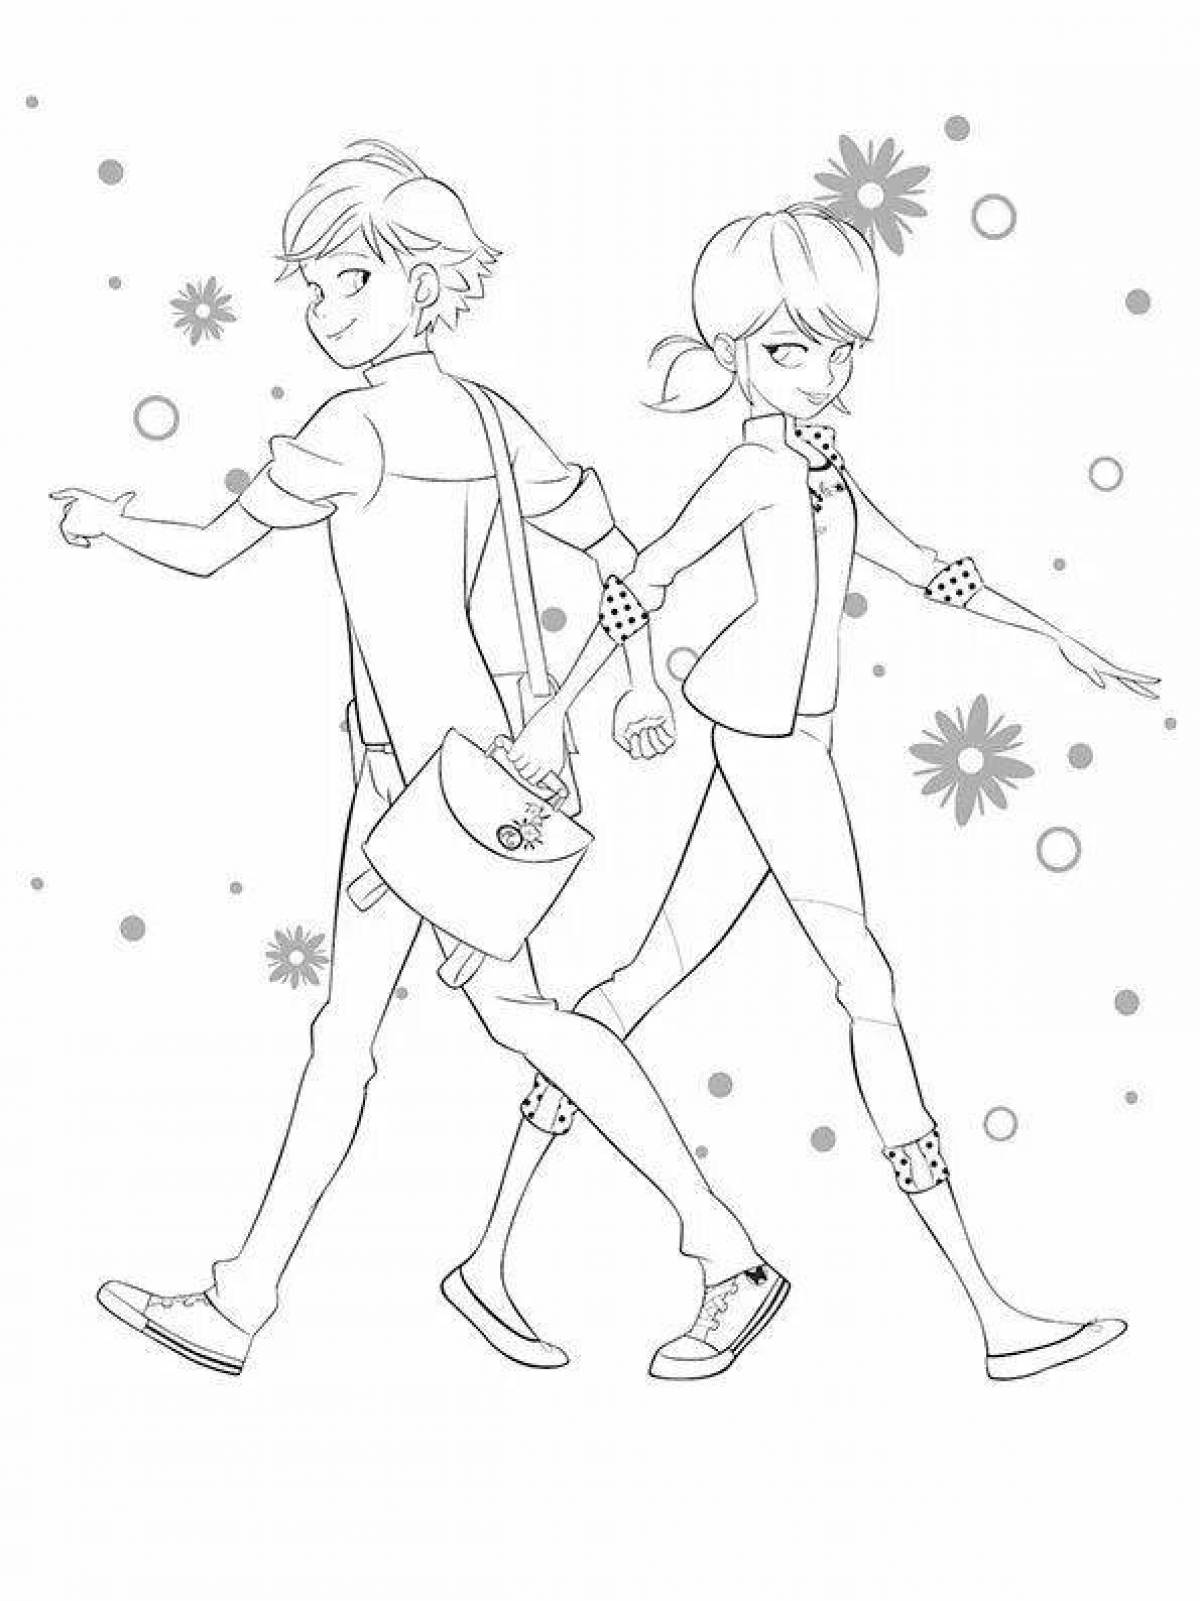 Marinette and adrian coloring pages